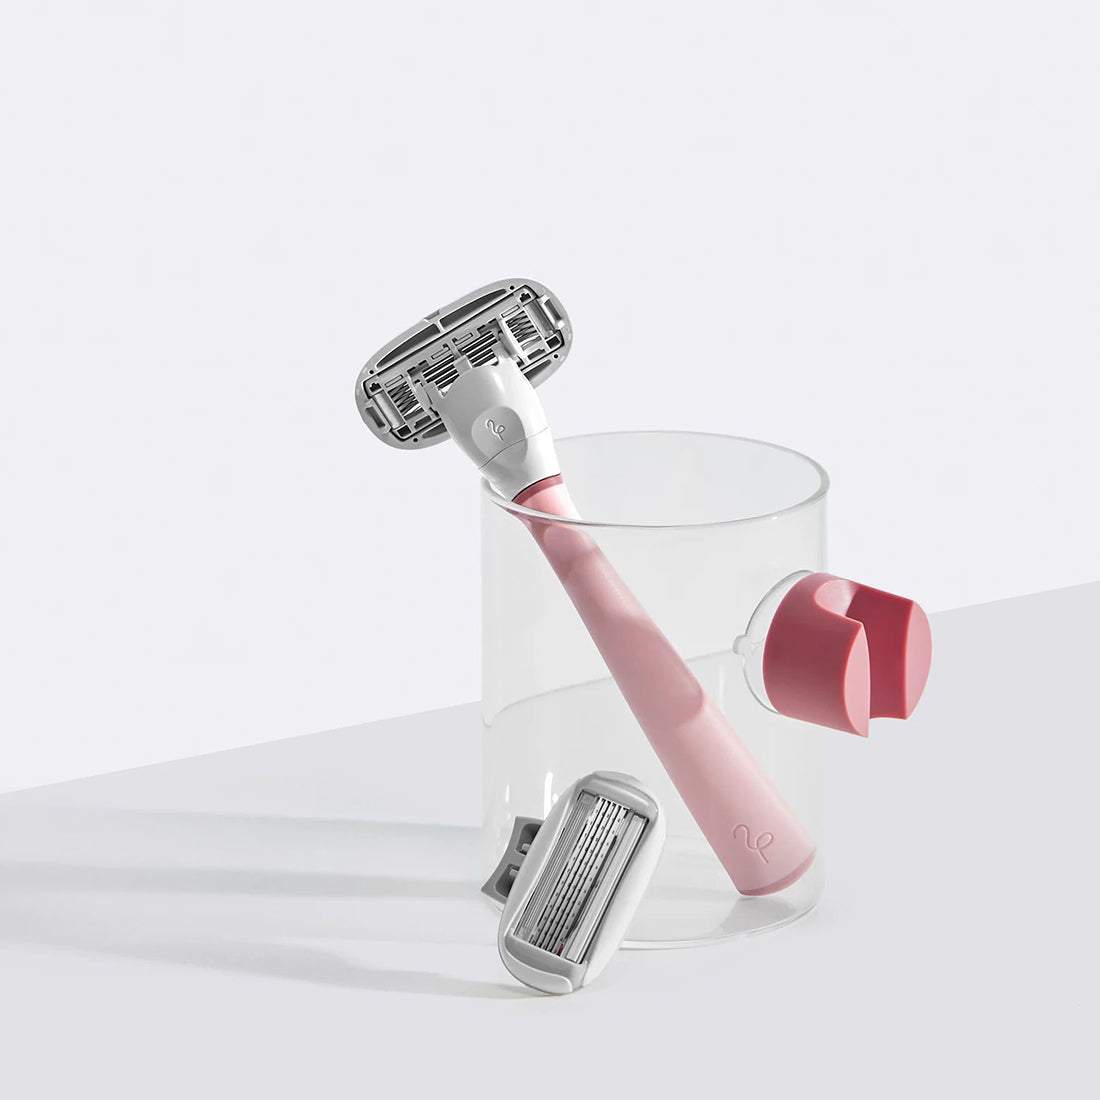 Rose Flamingo razor in a glass cup with a blade cartridge on the side and the rose shower holder suctioned to the cup